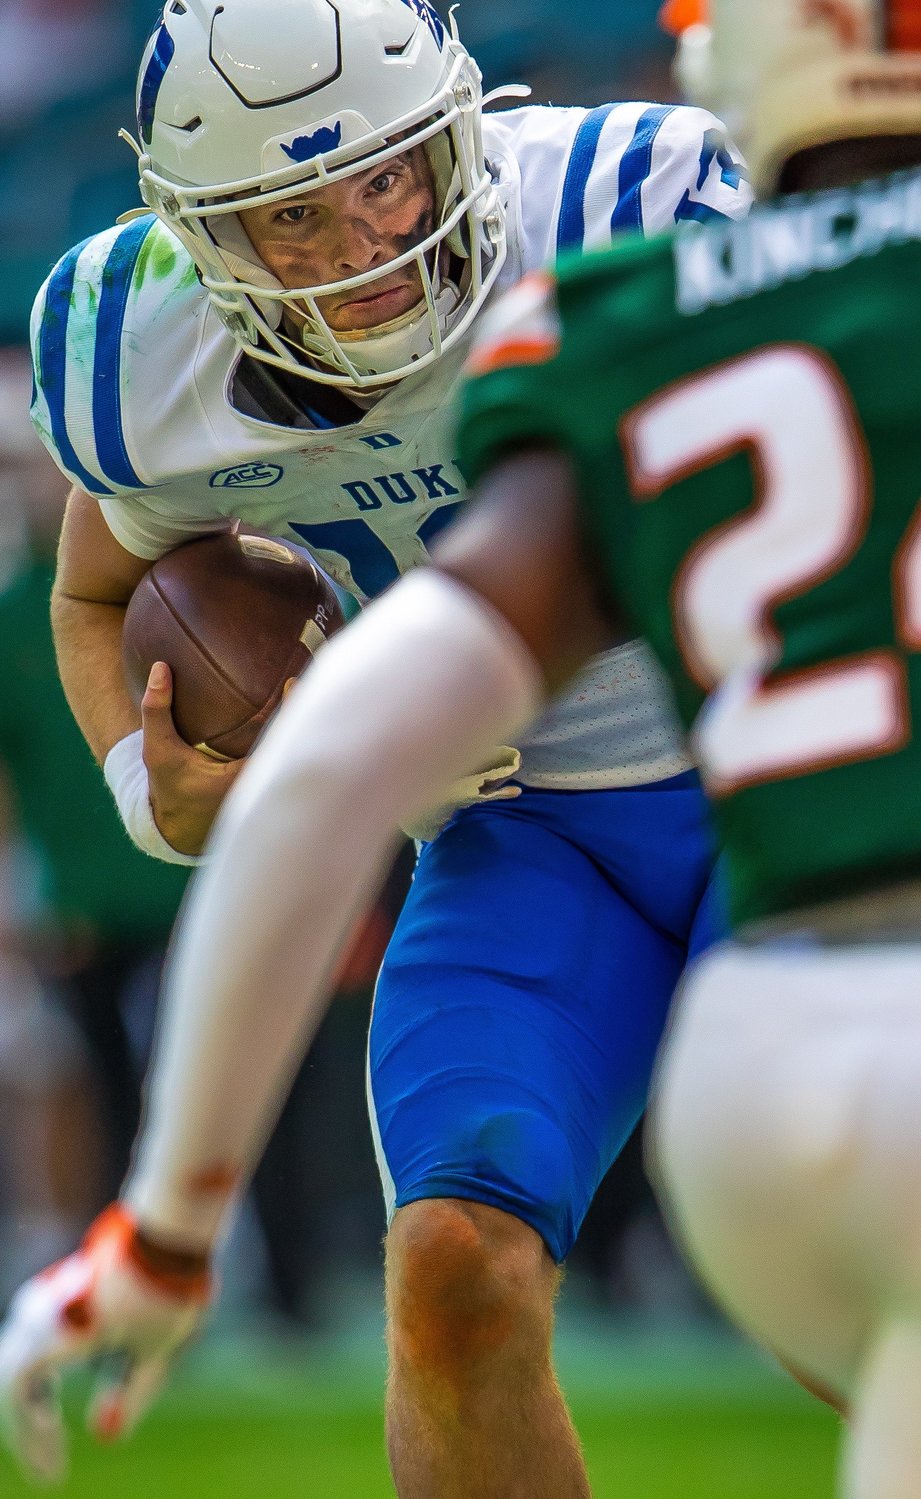 Former Fairhope Pirate quarterback Riley Leonard bears down on a Miami defender on one of his rushing attempts during the Duke Blue Devils’ away conference game against the Hurricanes at Hard Rock Stadium Oct. 22. Leonard said it was in Fairhope that he learned how to really run behind his pads.